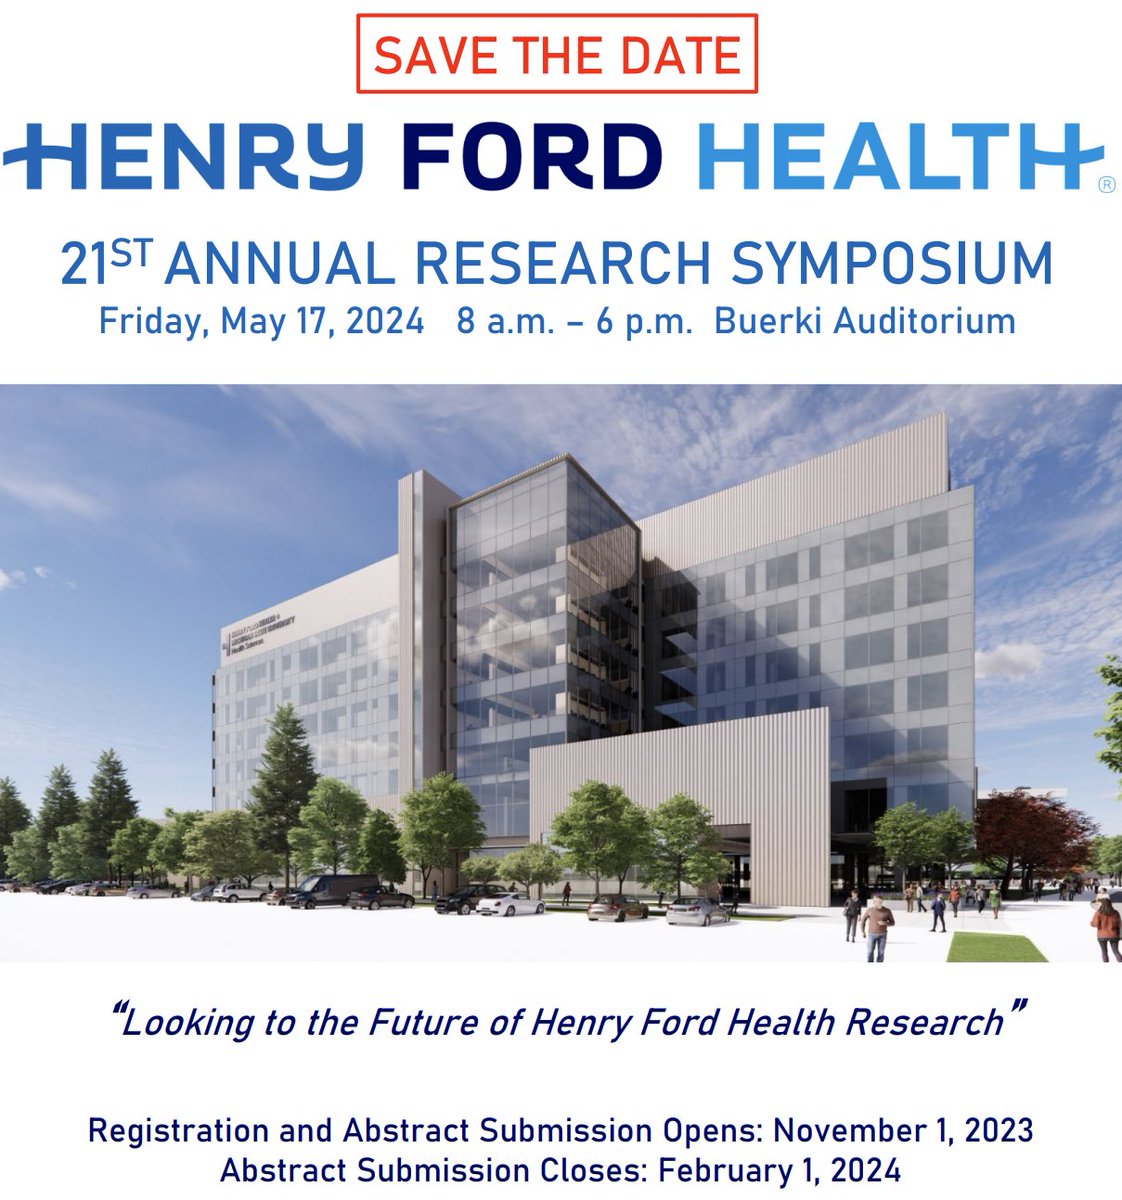 Excited to share this save the date for the 21st annual @HenryFordHealth Research Symposium, co-chaired by @Amandality and @jmbrockphd! @HFHOrthoRes @HFHypertension @HFAnesthesiaRes